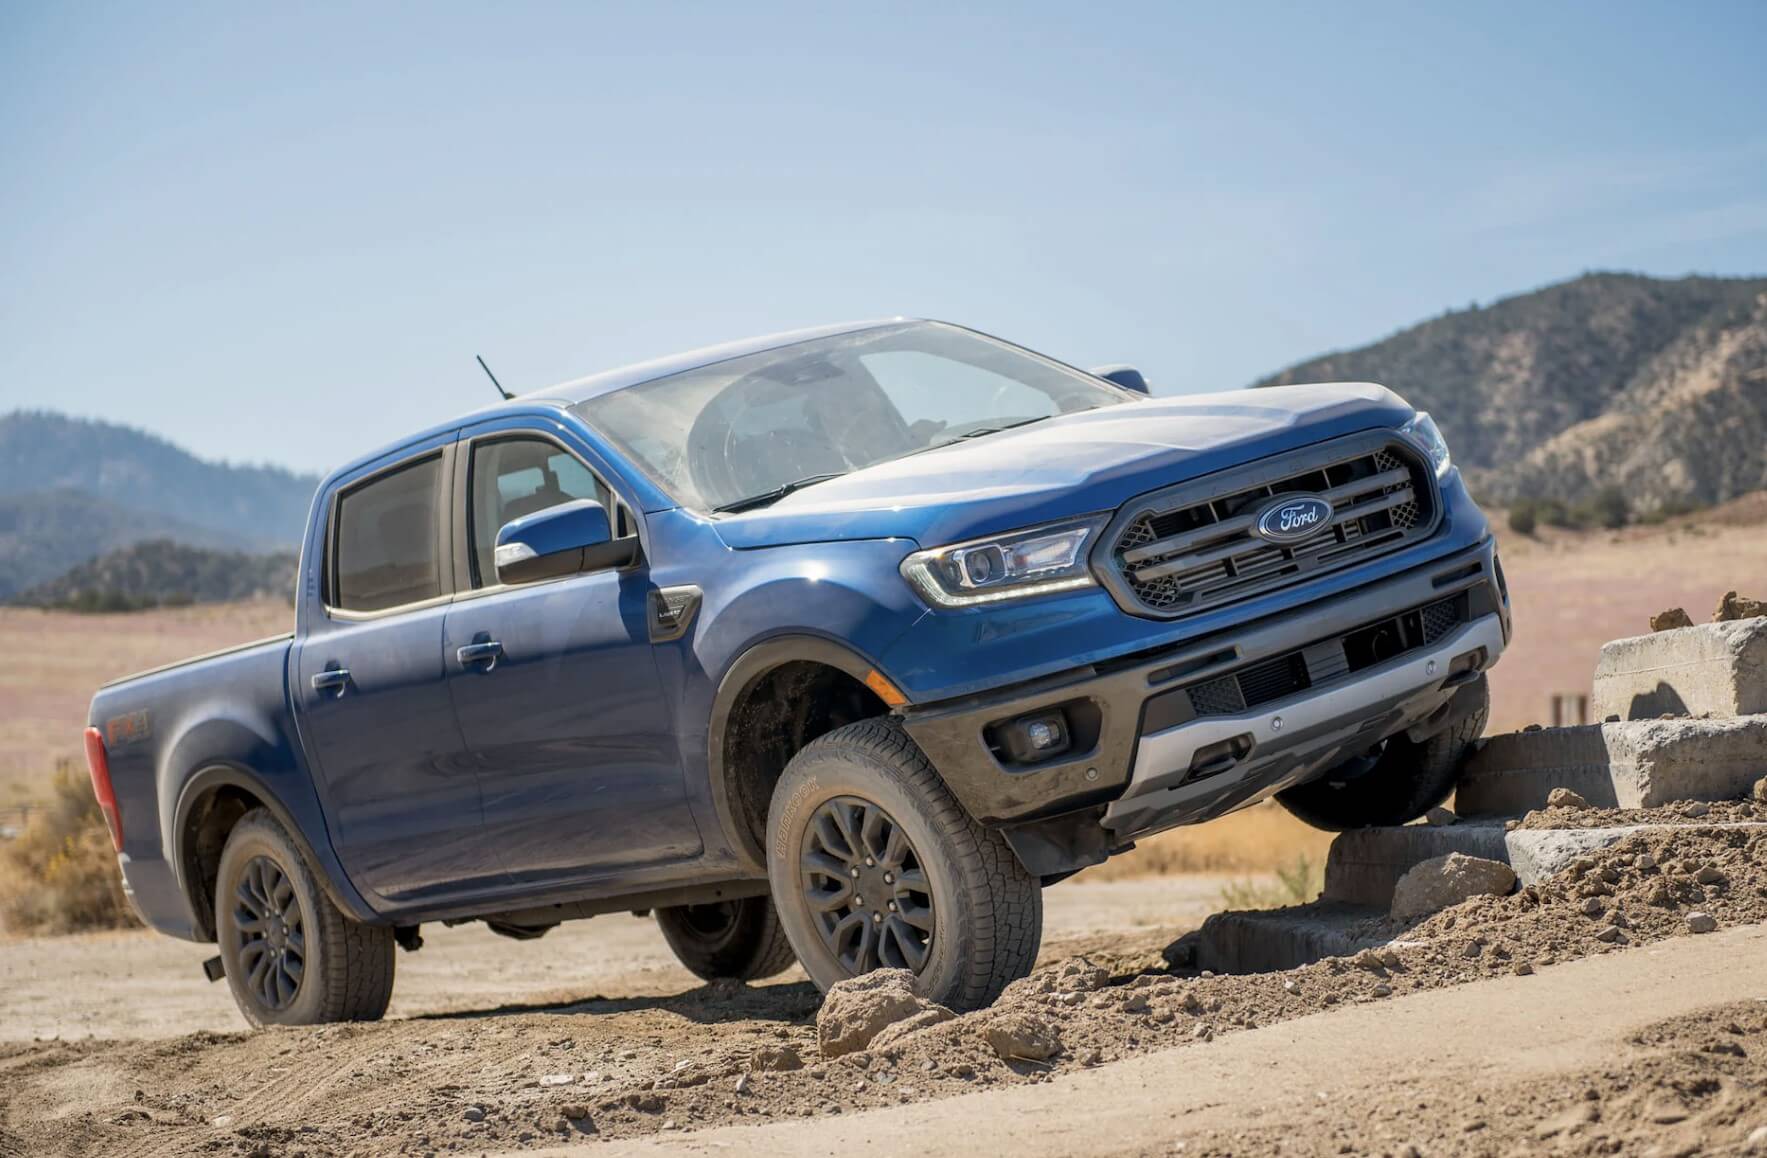 A blue 2023 Ford Ranger driving off-road. The 2023 Ford Ranger interior leaves a lot to be desired.